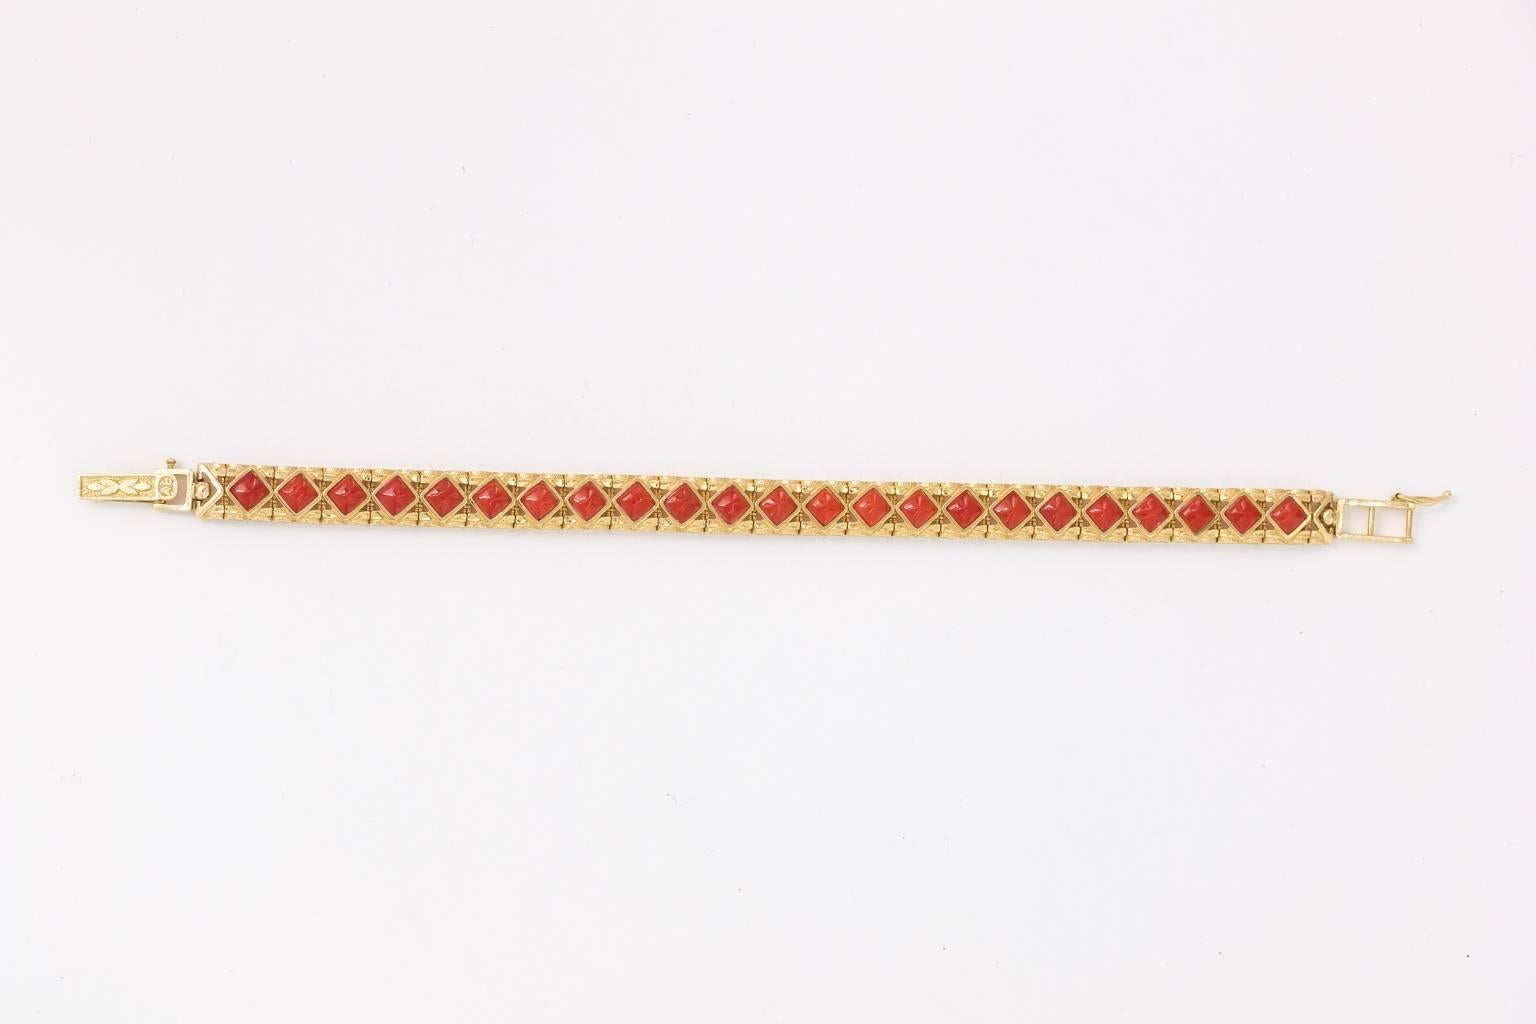 Fabulous 14k solid yellow gold Mediterranean Red Coral bracelet. Coral is natural un dyed. Measures 7